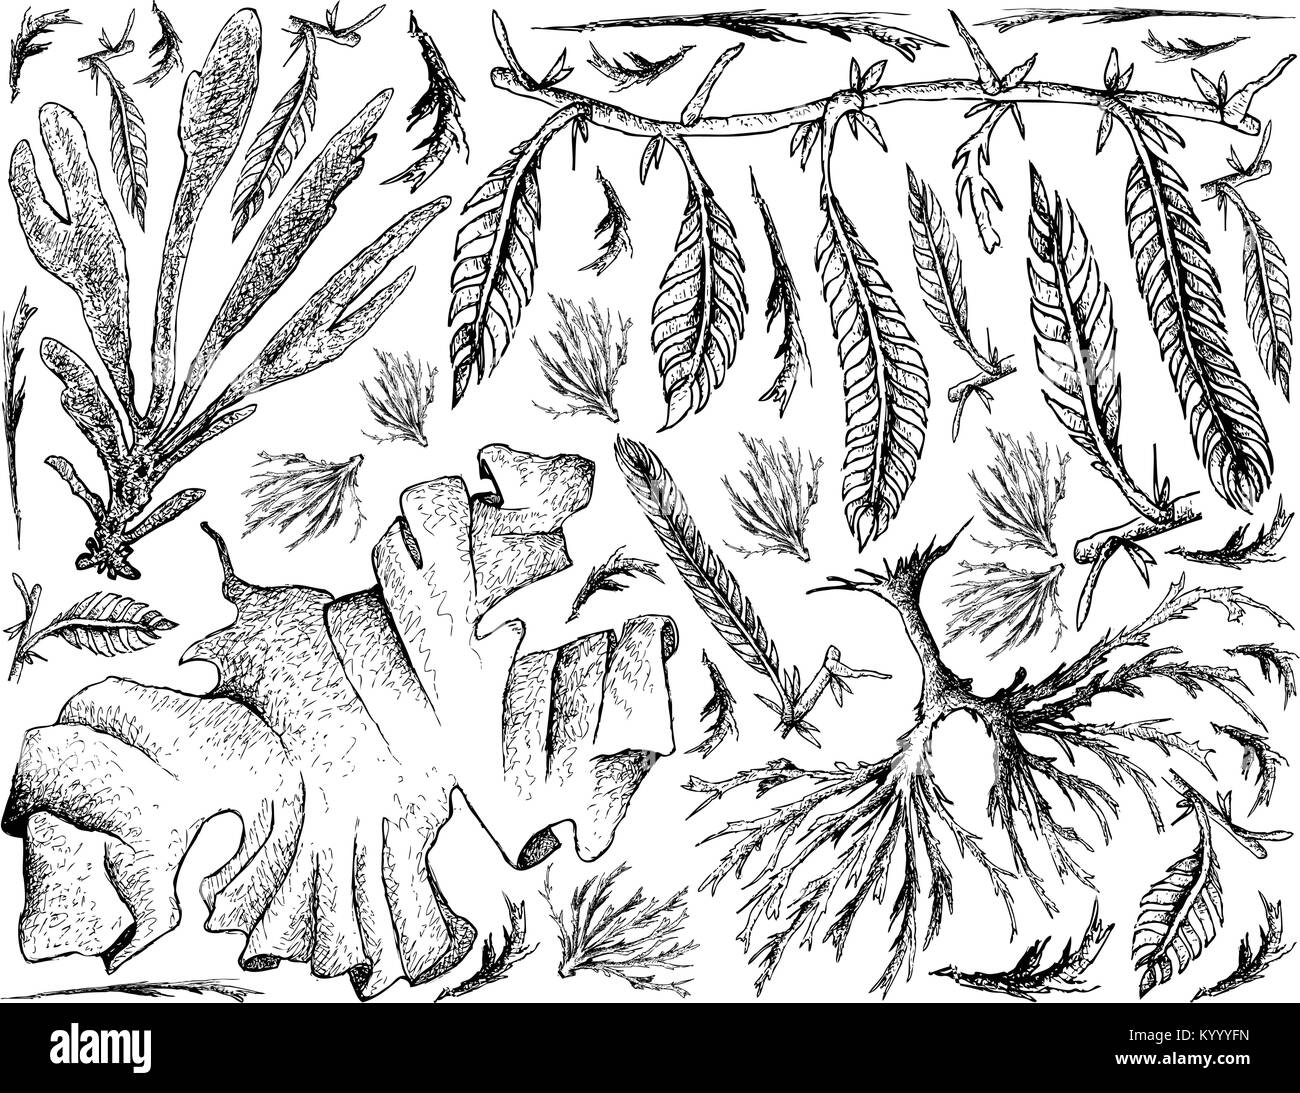 Sea Vegetables, Illustration Background of Hand Drawn Sketch Dulse, Caulerpa Taxifoli, Laver and Arame Seaweed. High in Calcium, Magnesium and Iodine. Stock Vector